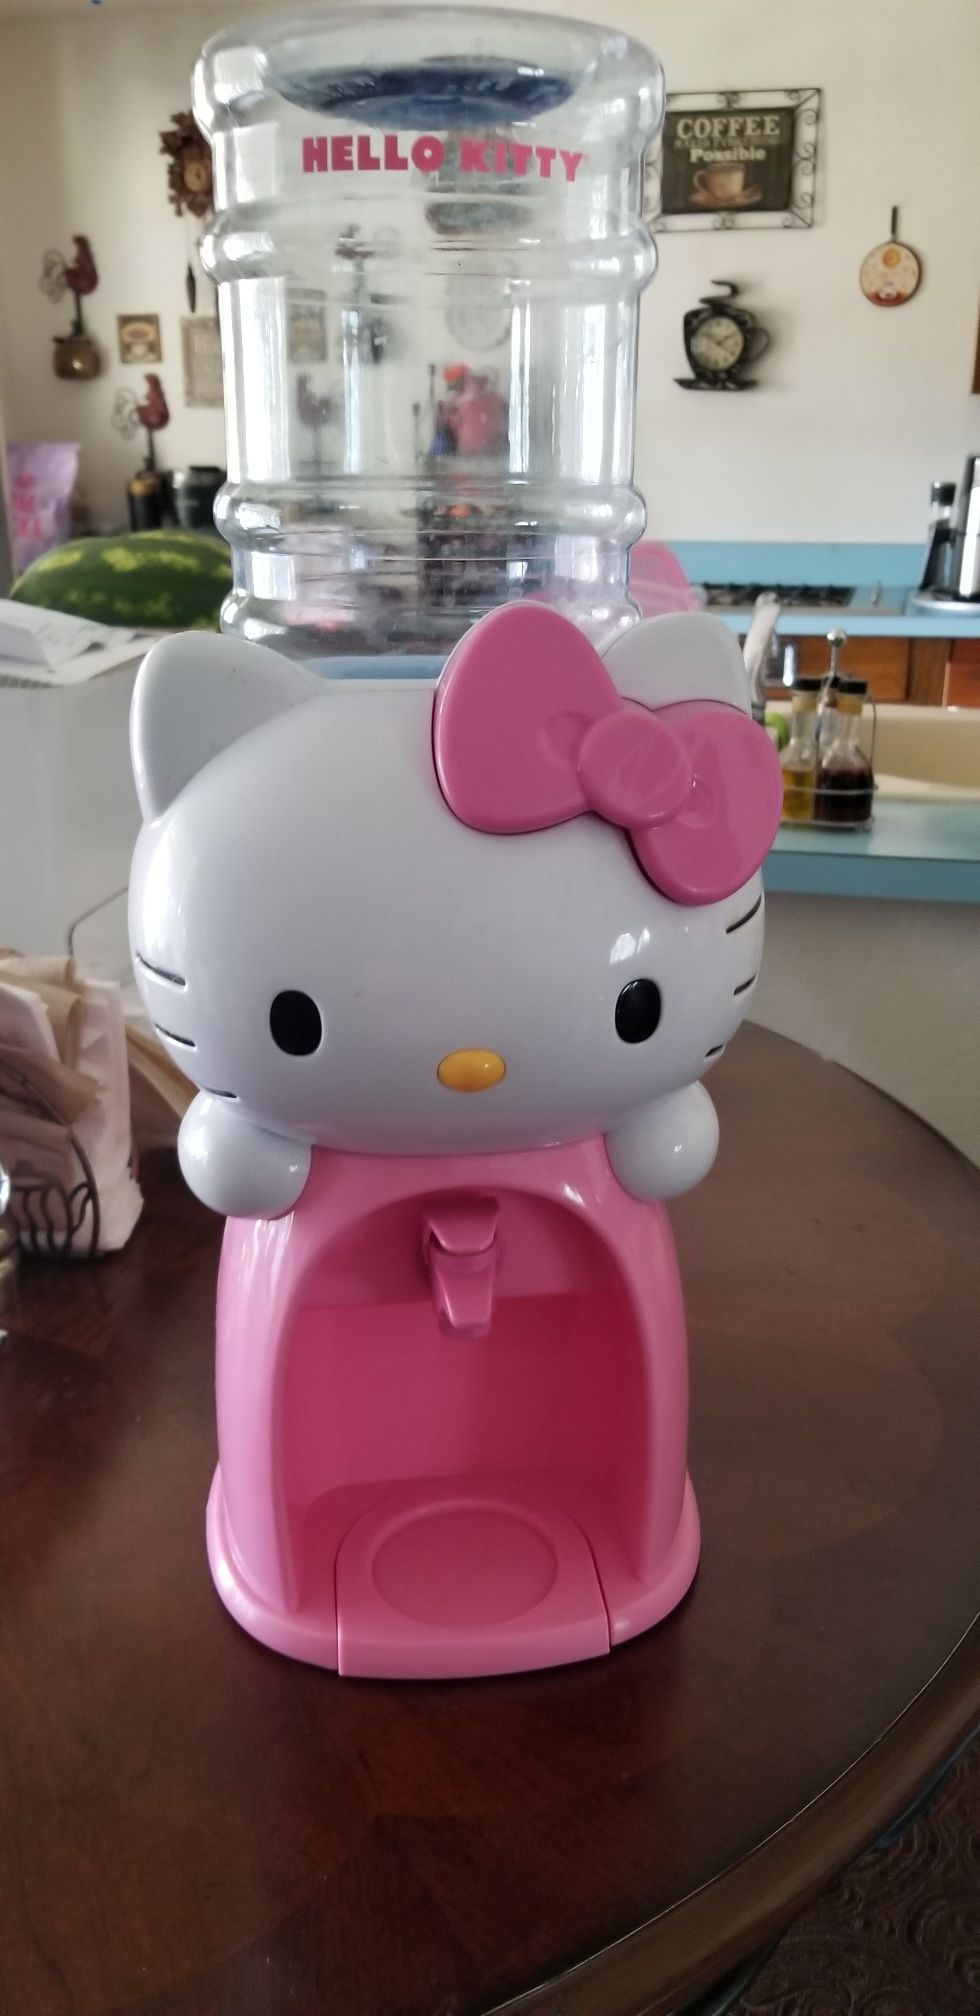 Hello kitty water holder.. Only sat on shelf not used